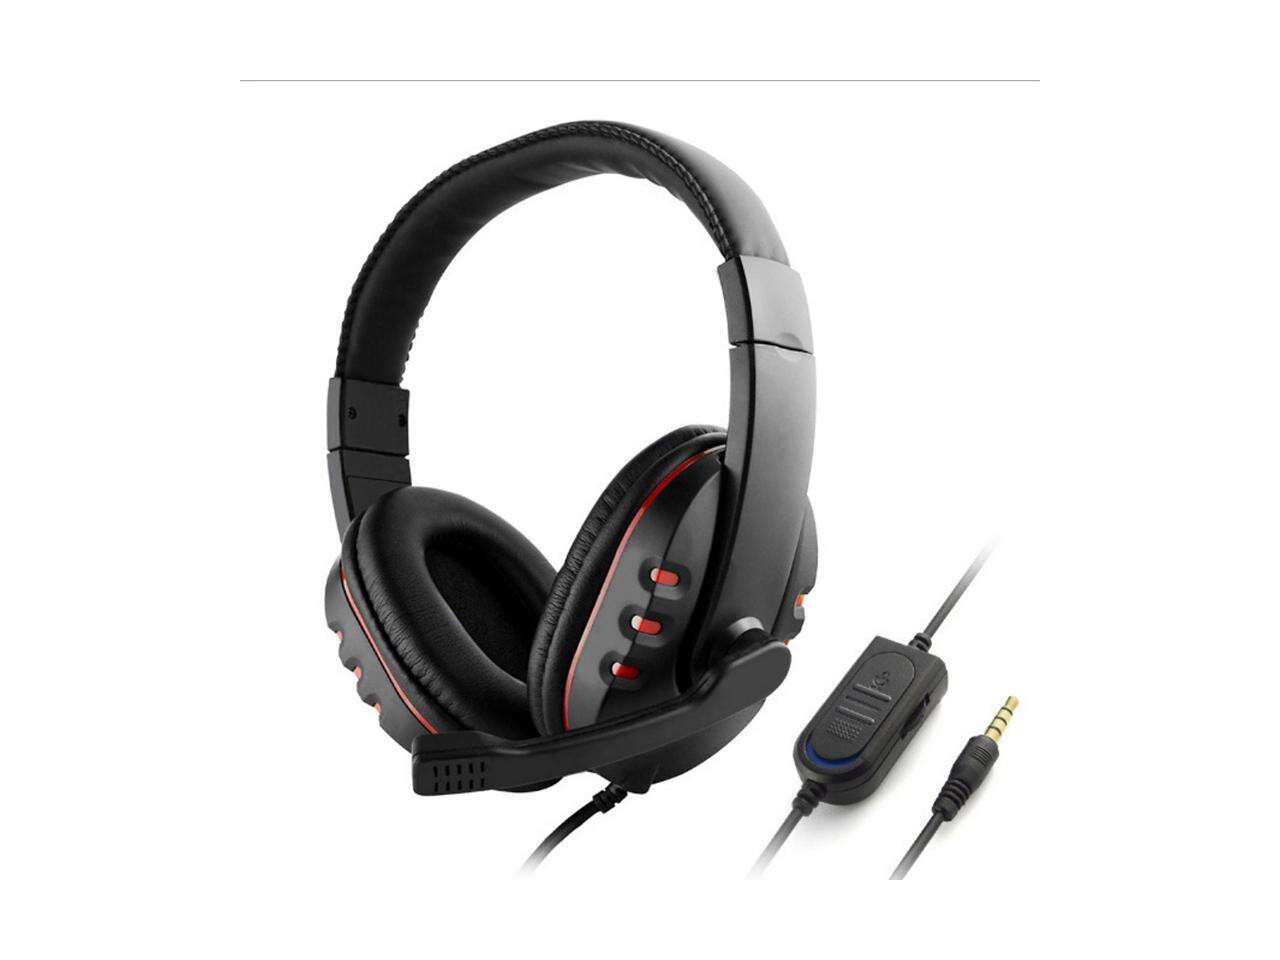 Stereo Headphone Headset Deep Bass Computer Gaming Headset PS4 with Mic LED Light for PC Game Gamer Earphone